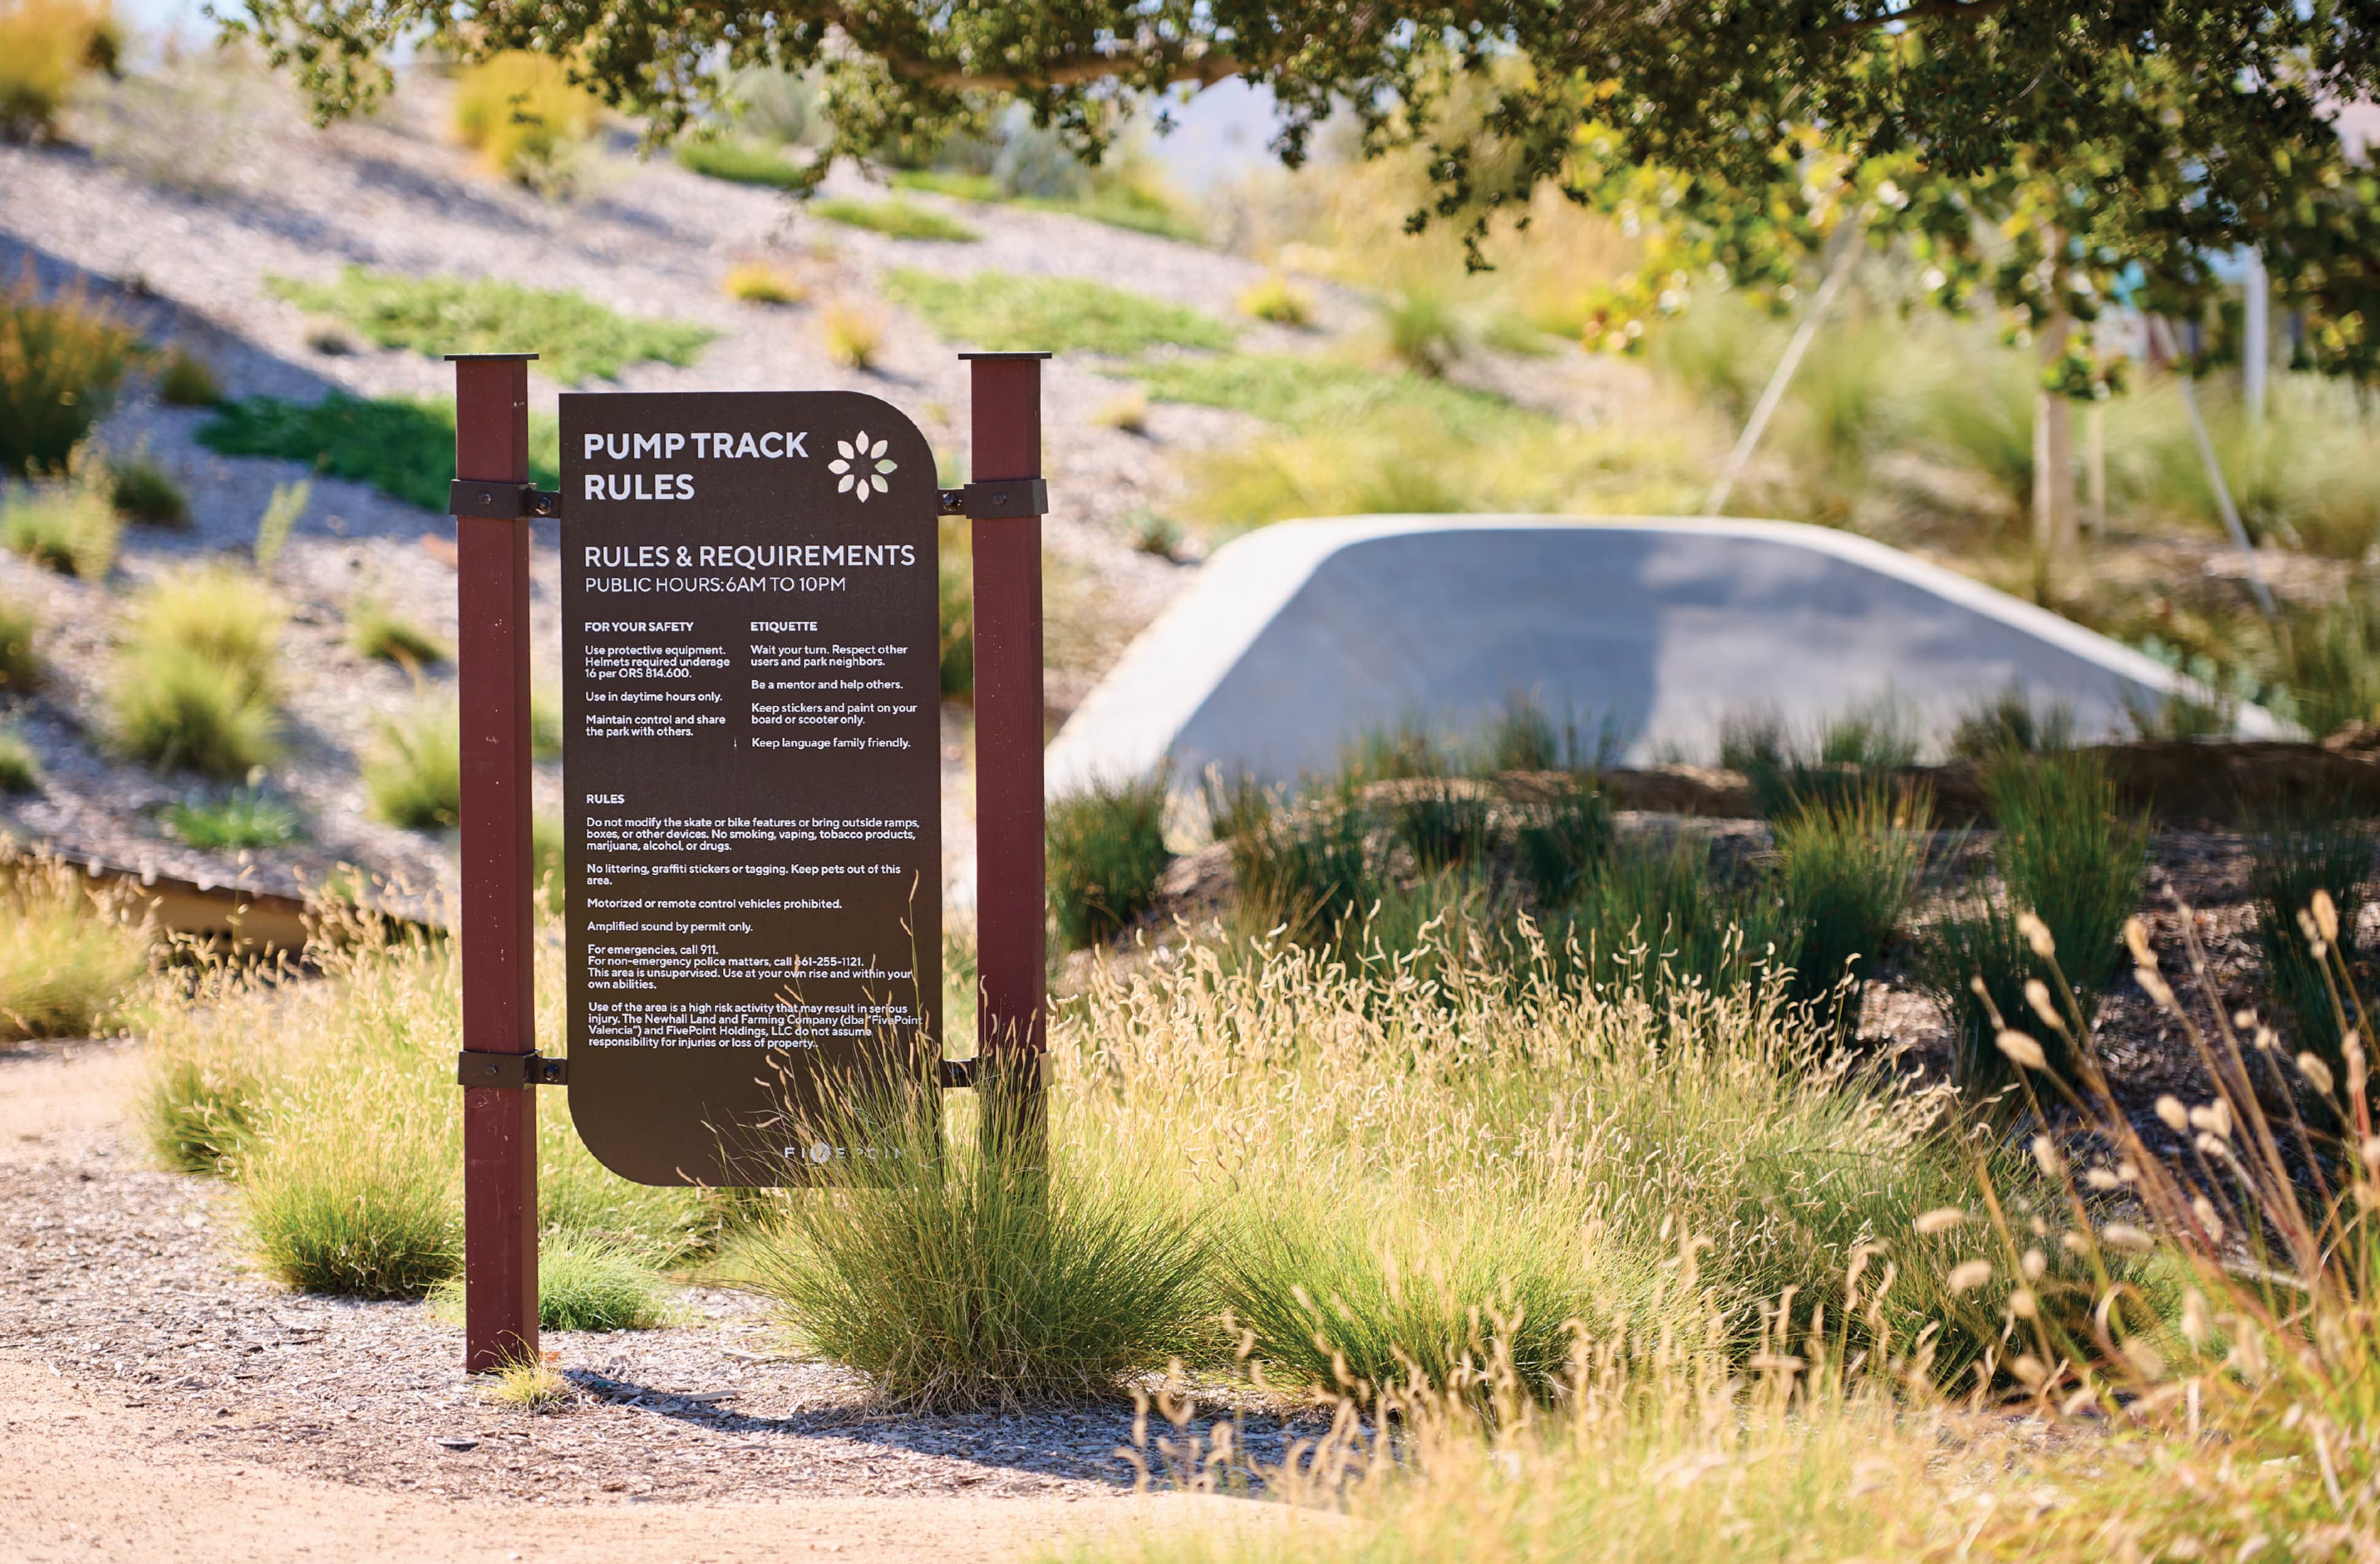 Image of the pump track rules signage for the pump track for bikes at Valencia in Sant Clarita, California. Signage by RSM Design. 